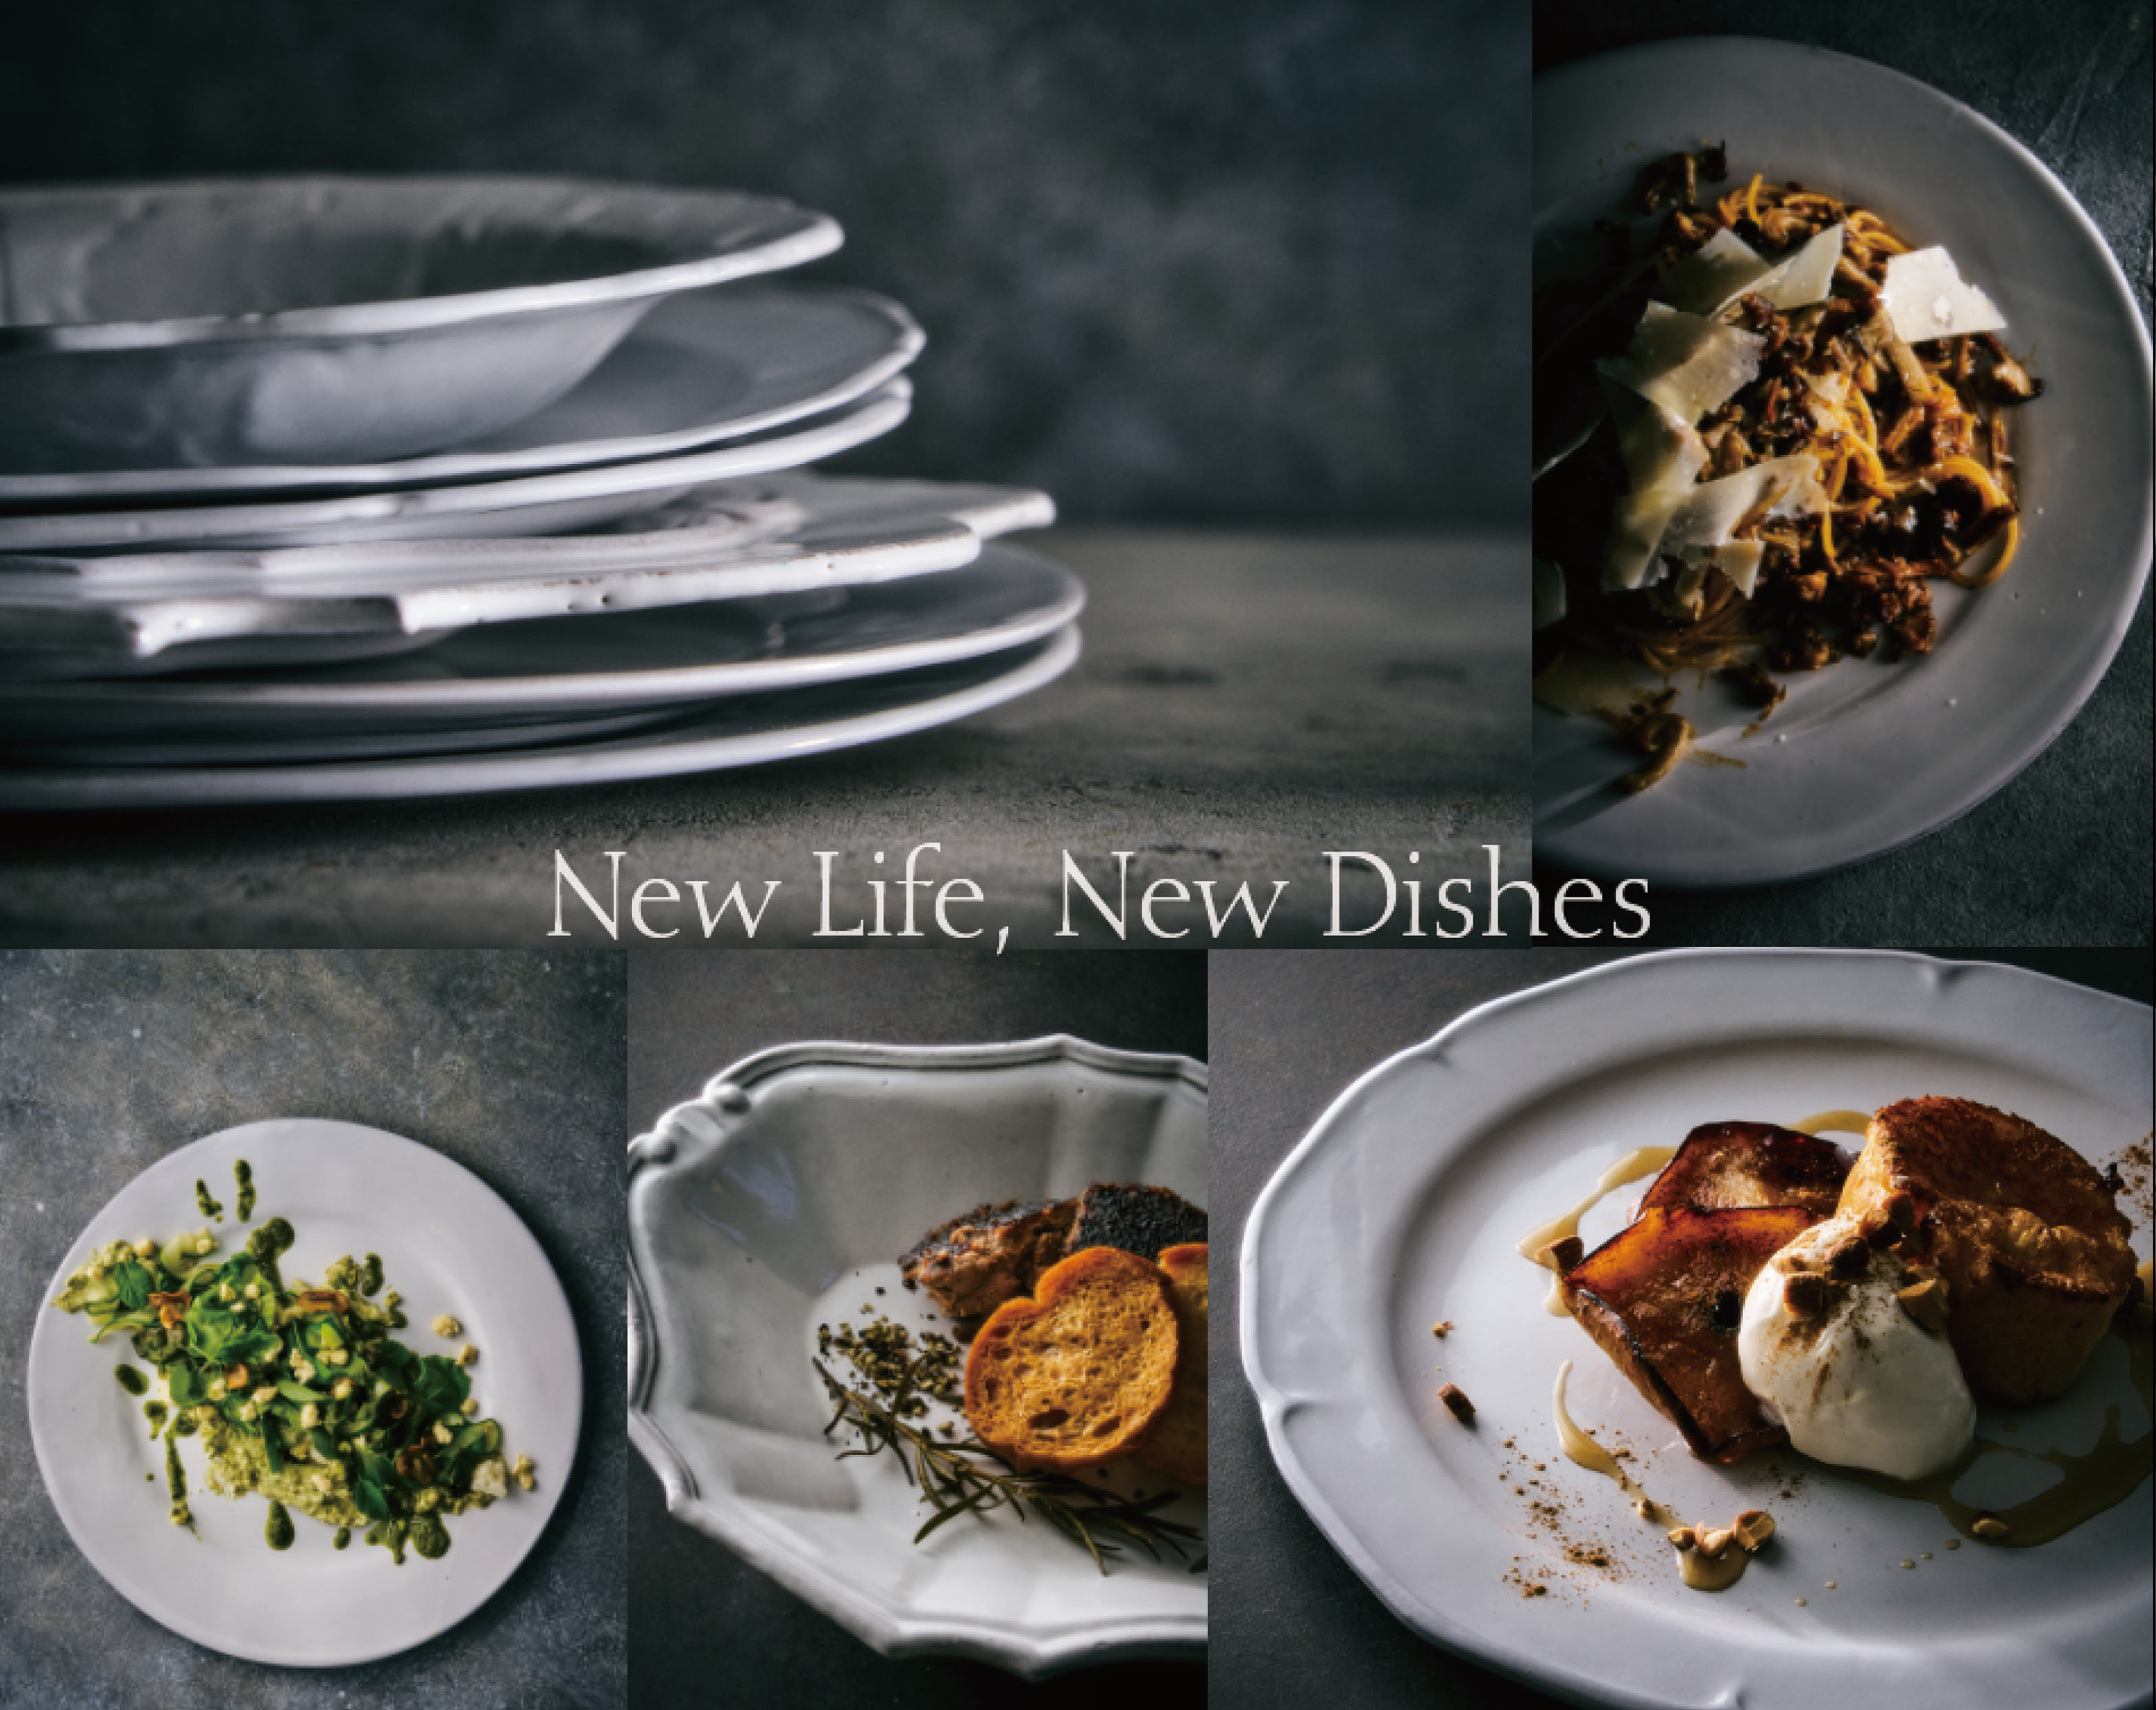 New Life, New Dishes